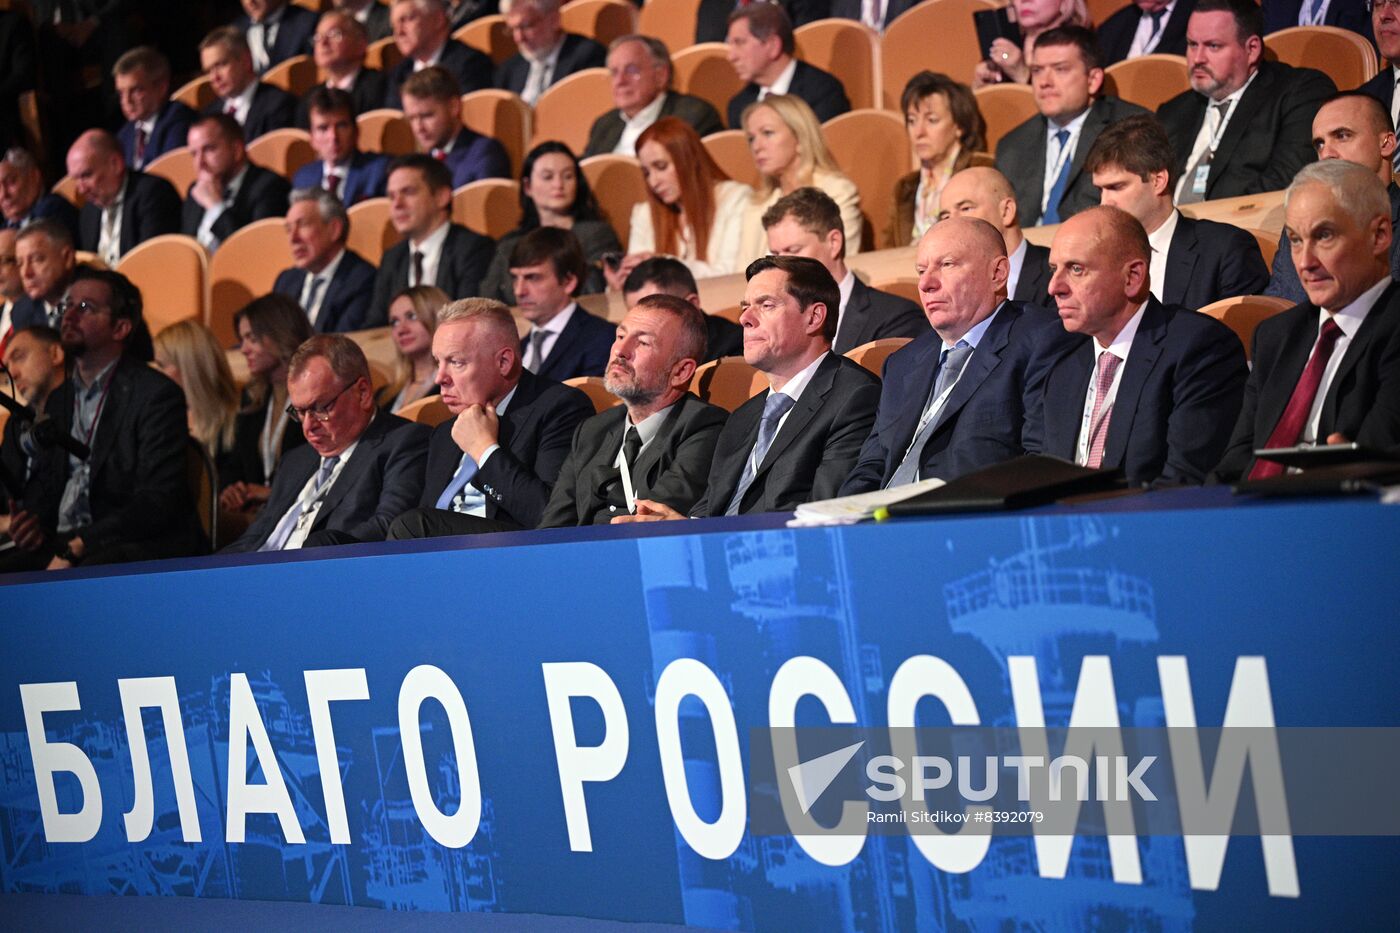 Russia Industrialists and Entrepreneurs Union Congress